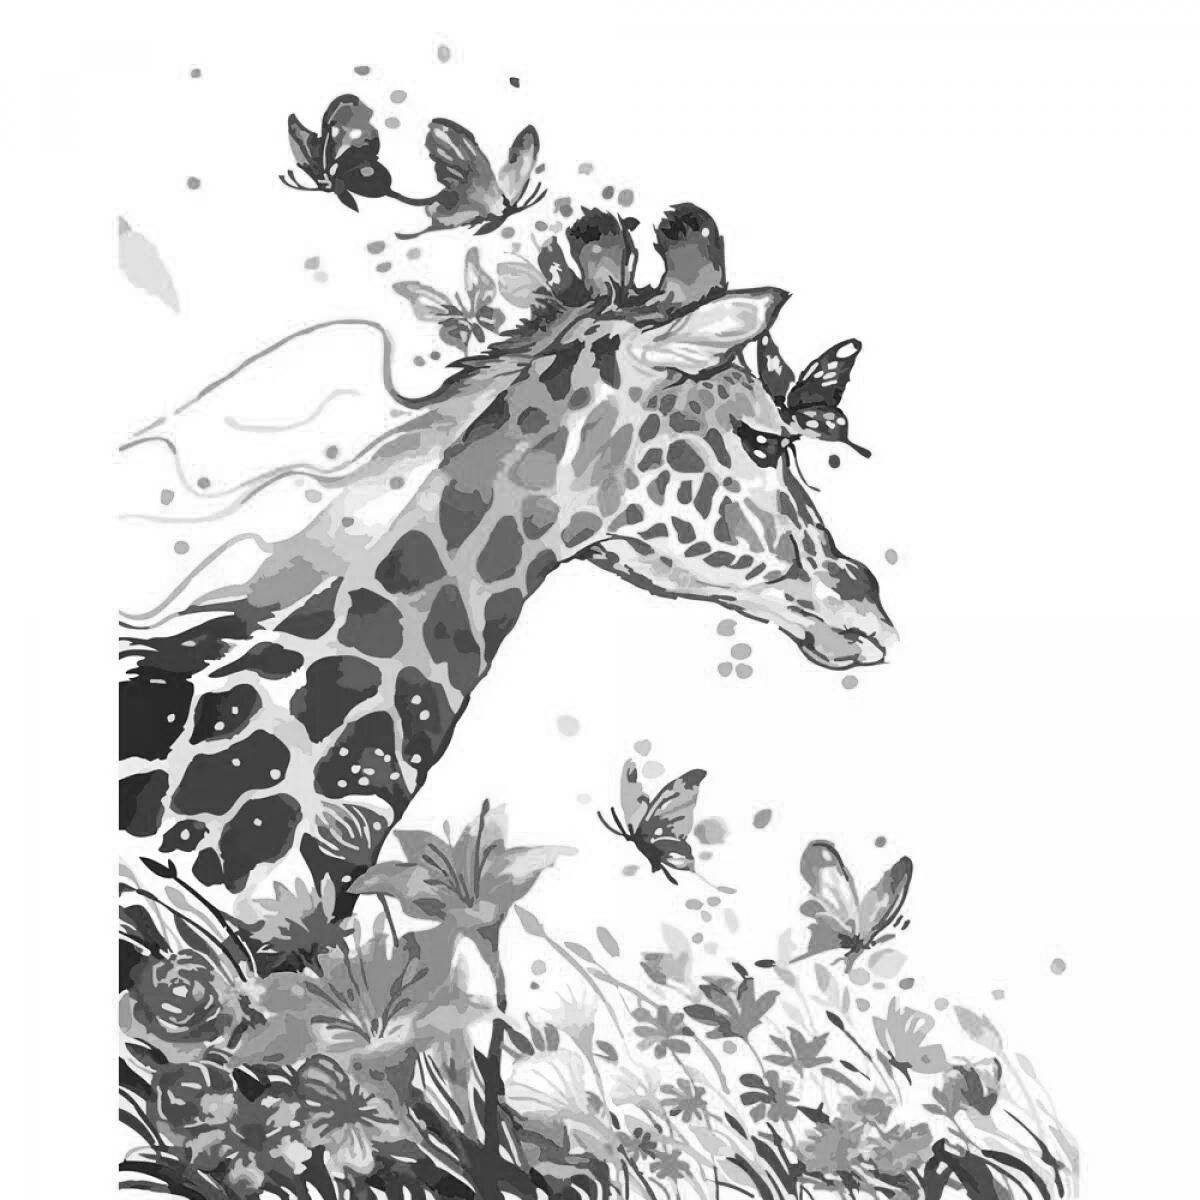 Exquisite giraffe coloring by numbers